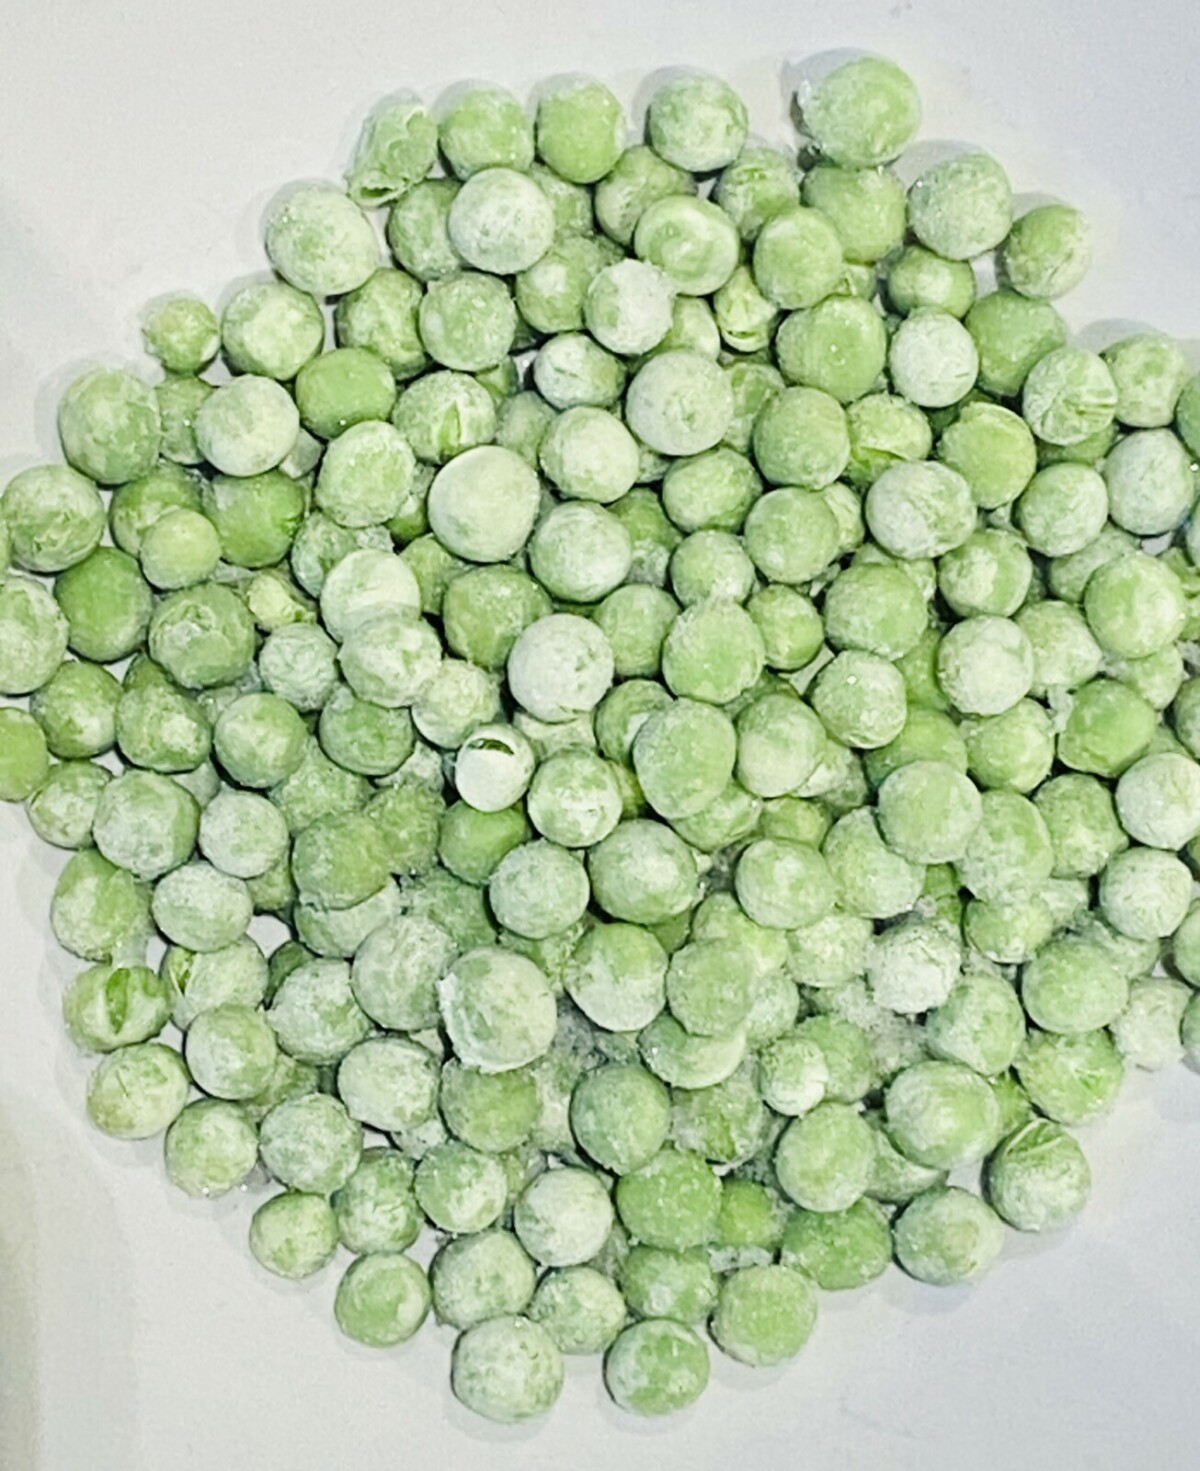 a dish of frozen peas